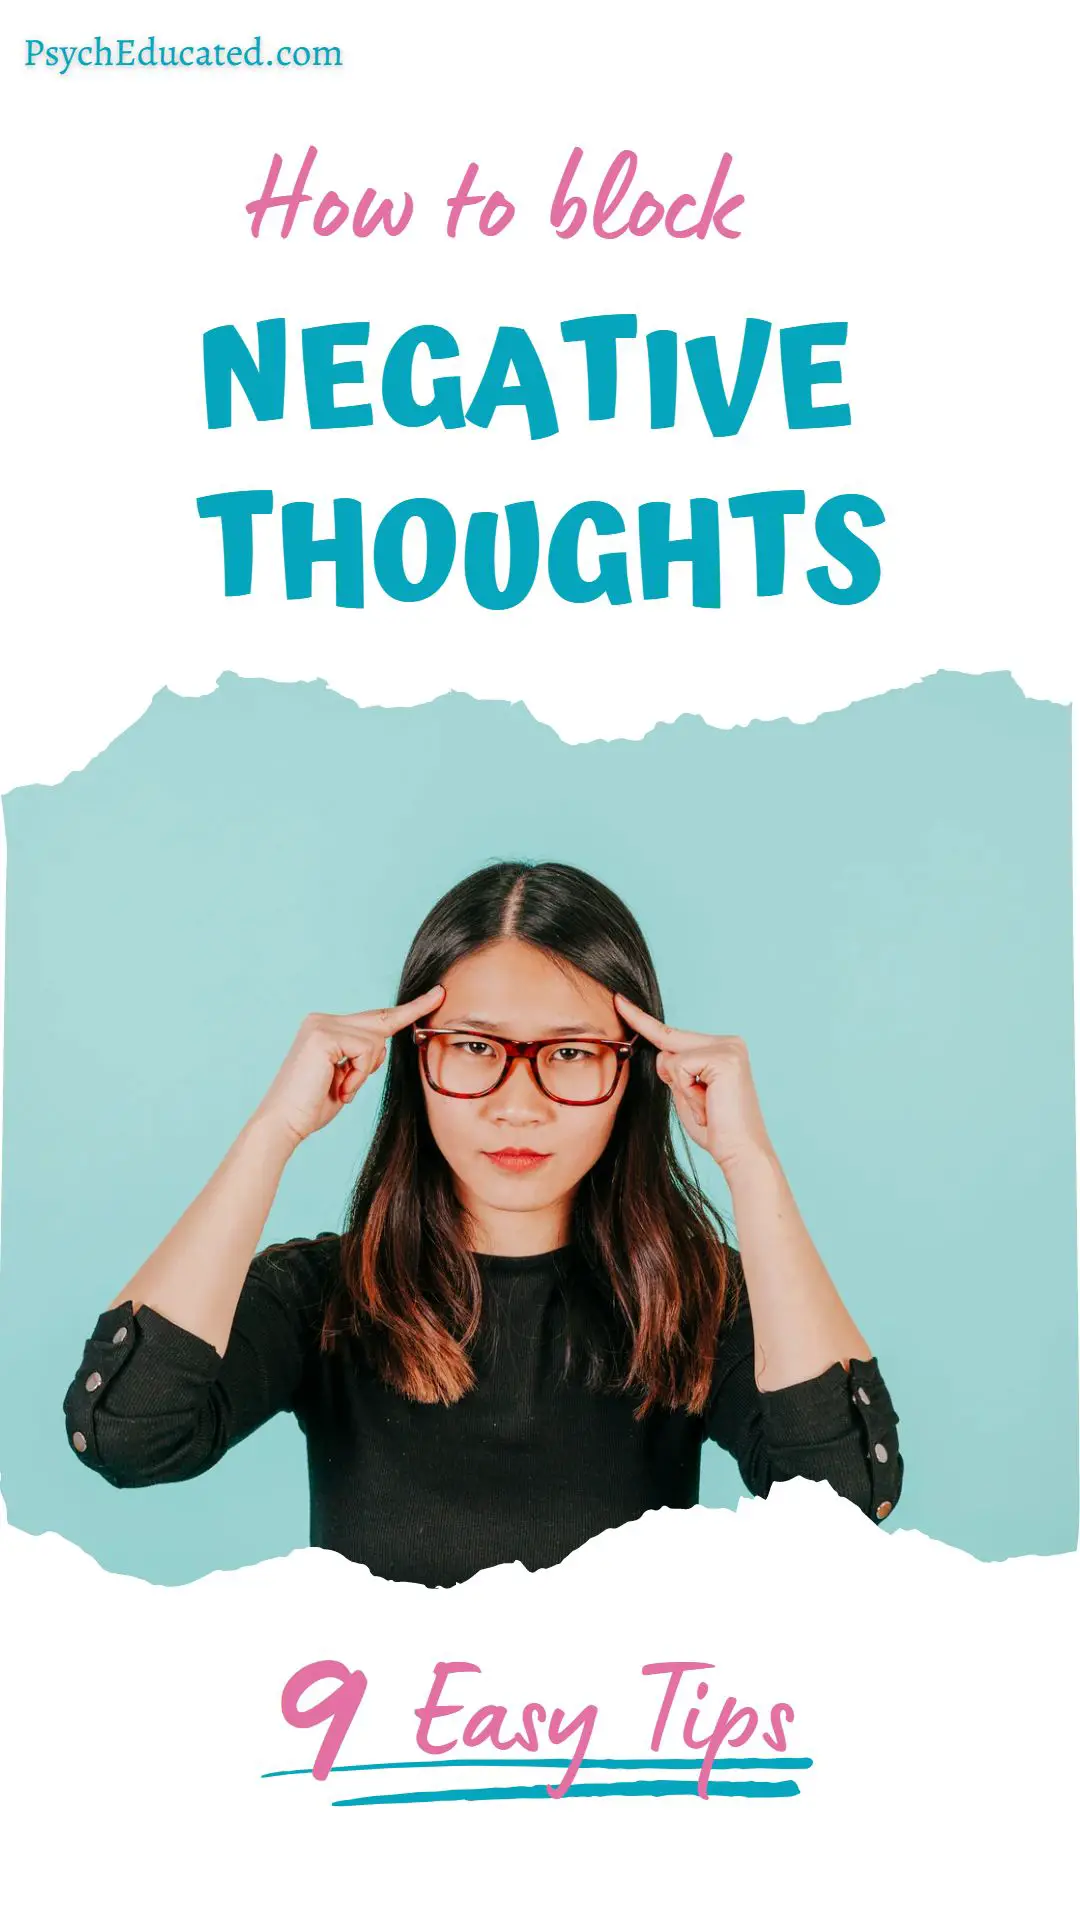 How to block negative thoughts